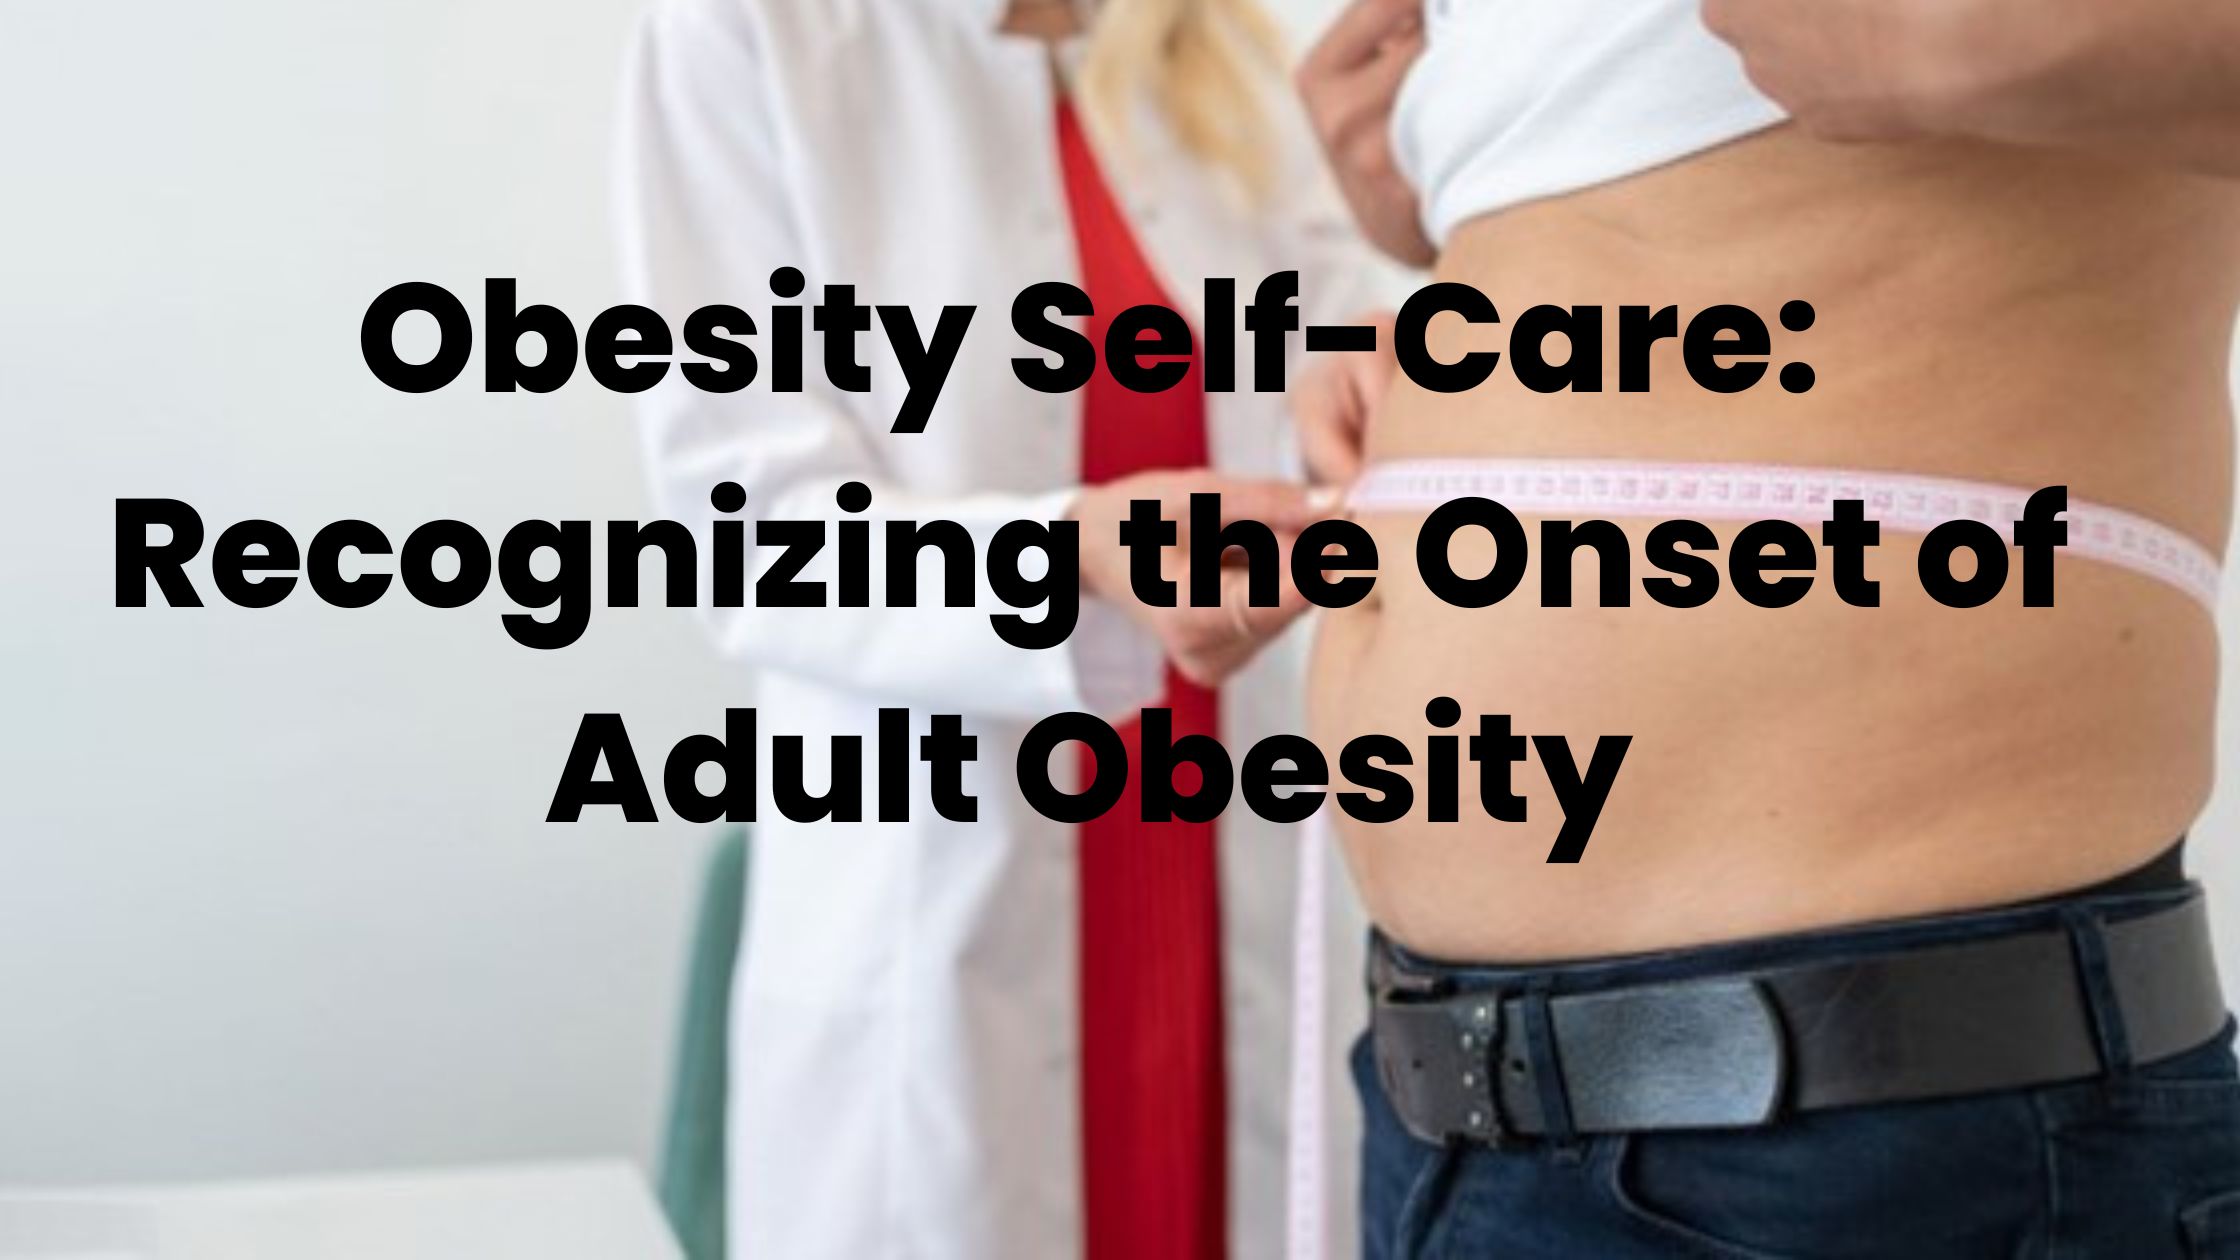 Obesity Self-Care Recognizing the Onset of Adult Obesity